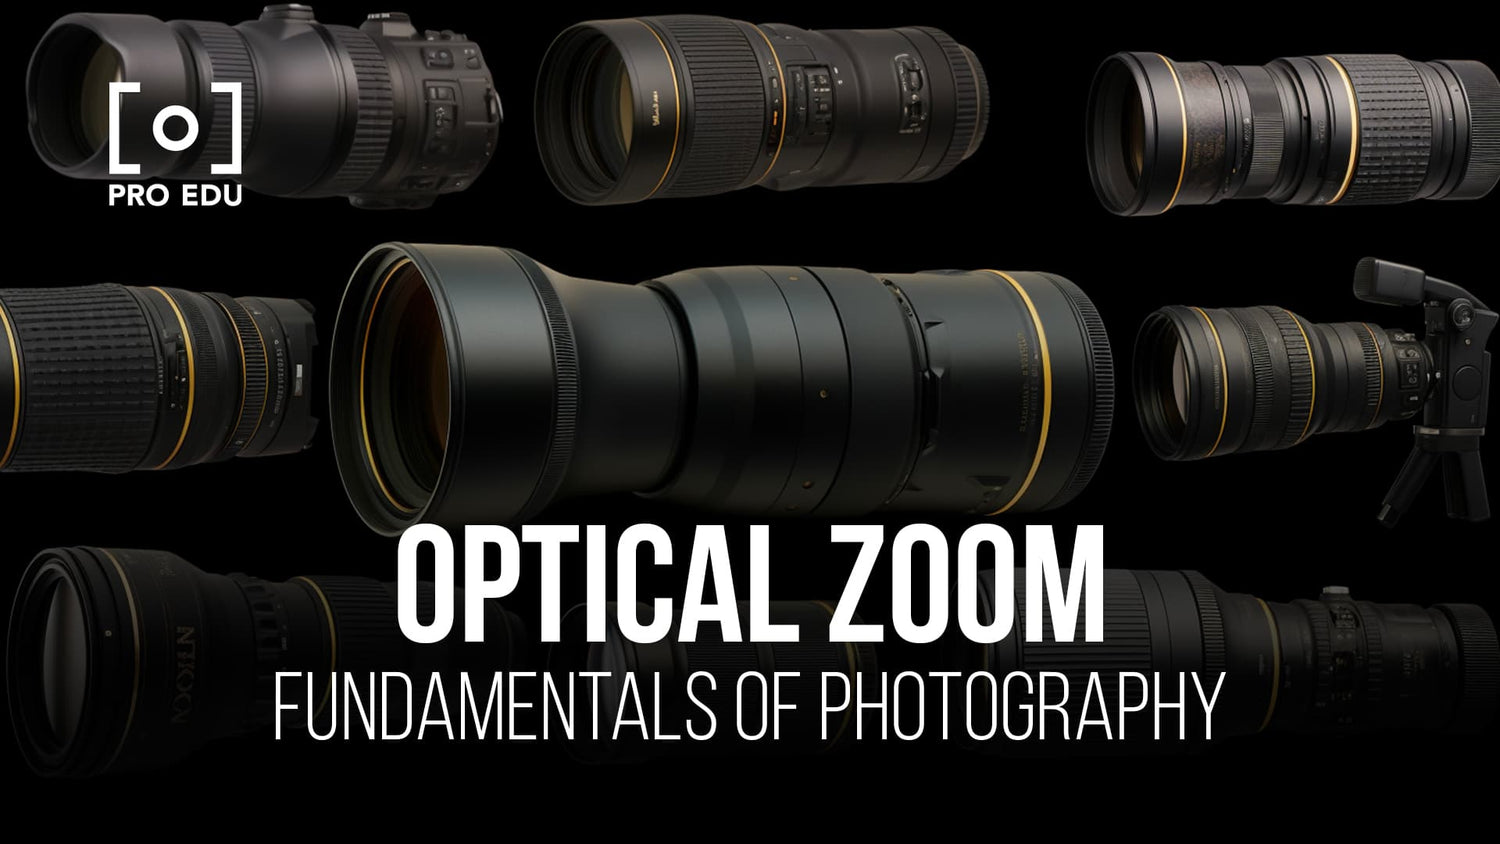 Bringing your subjects closer with optical zoom explained for photographers